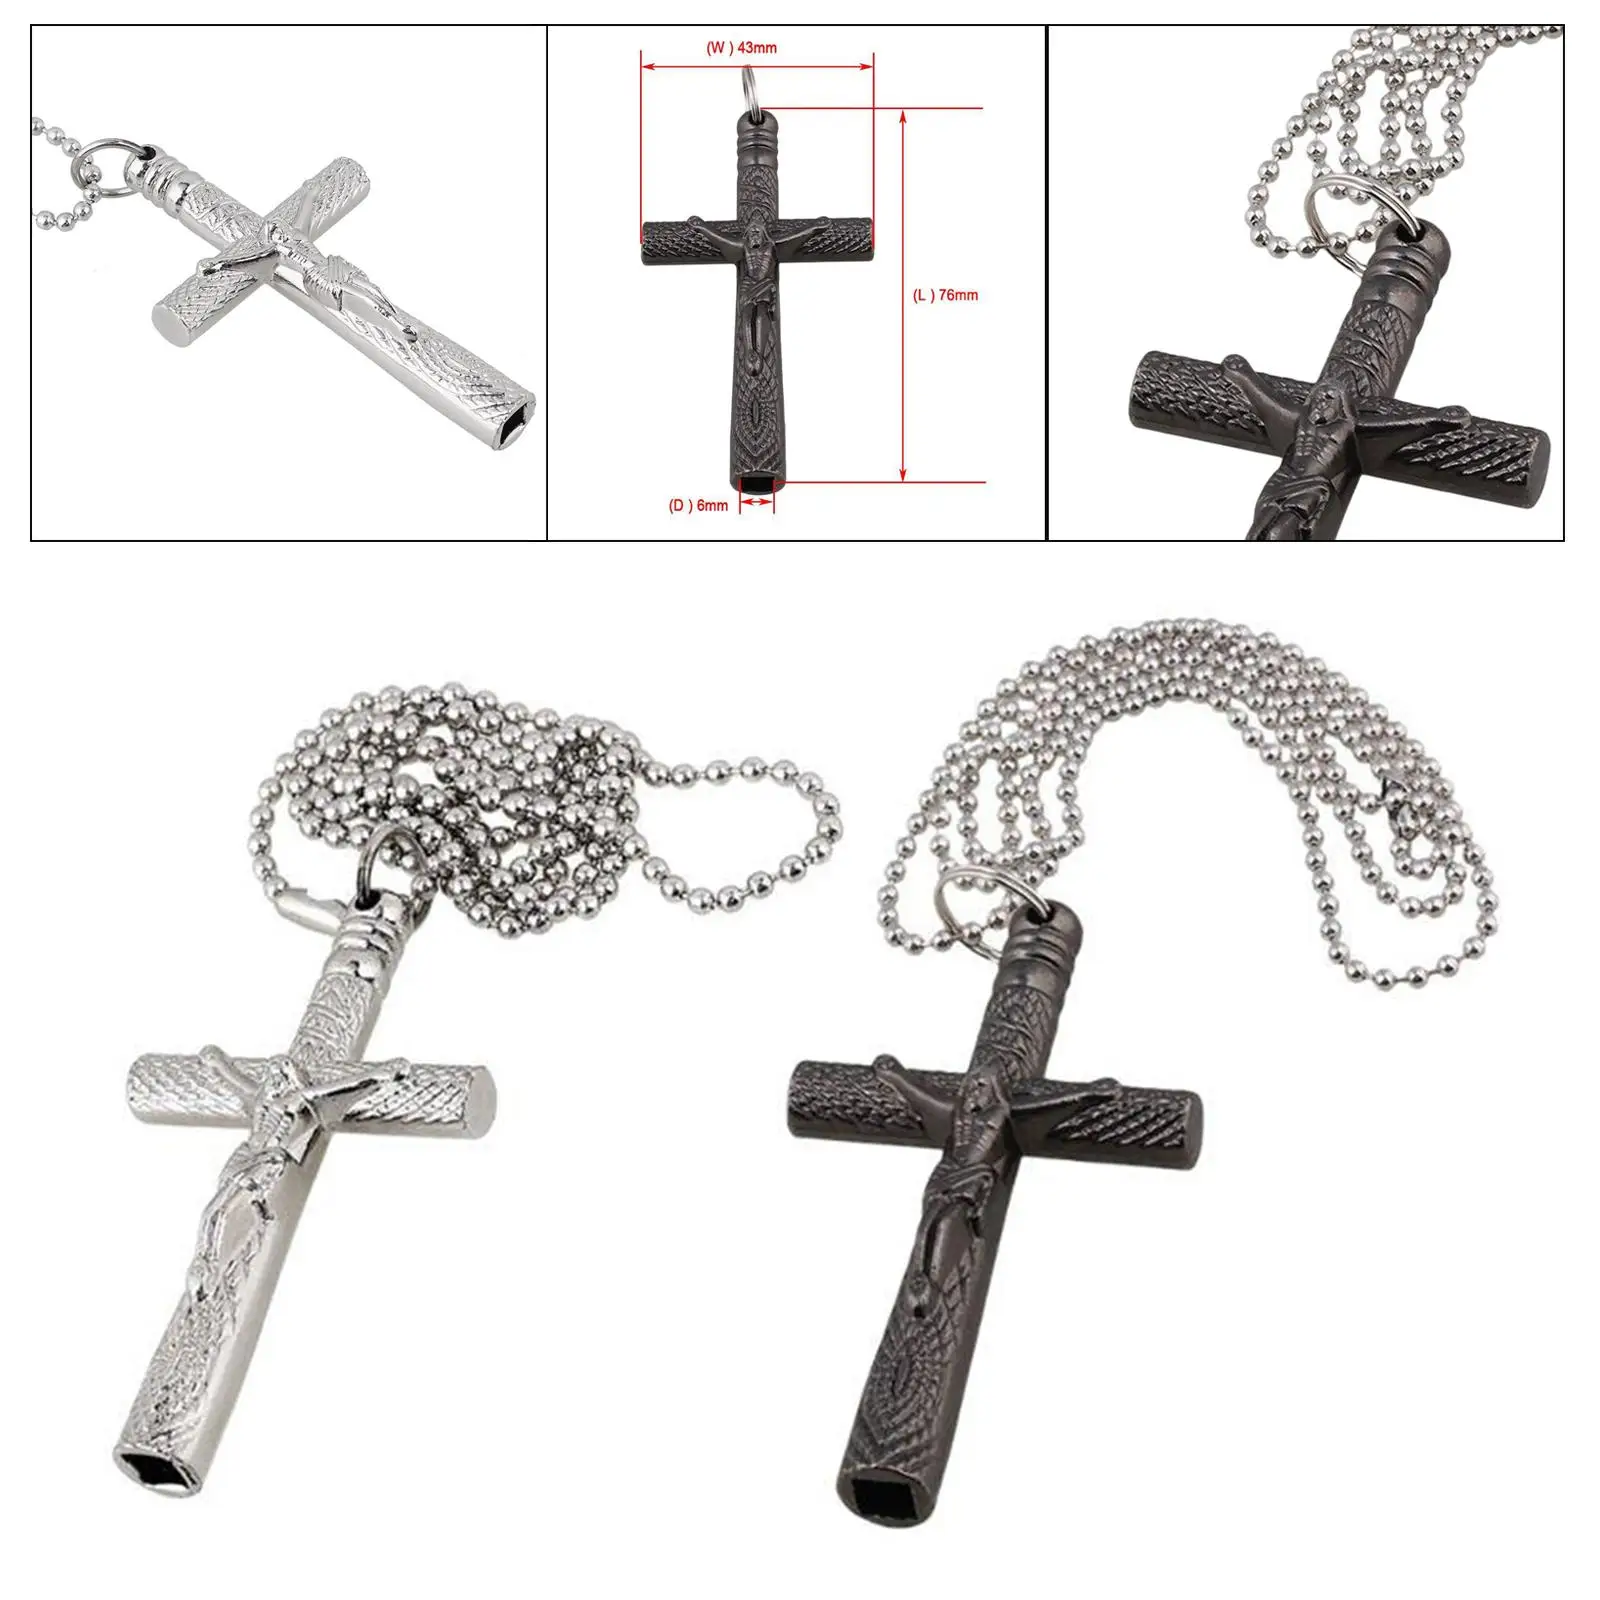 Jesus Drum Tuning Key Necklace Percussion Instruments Parts Accessories